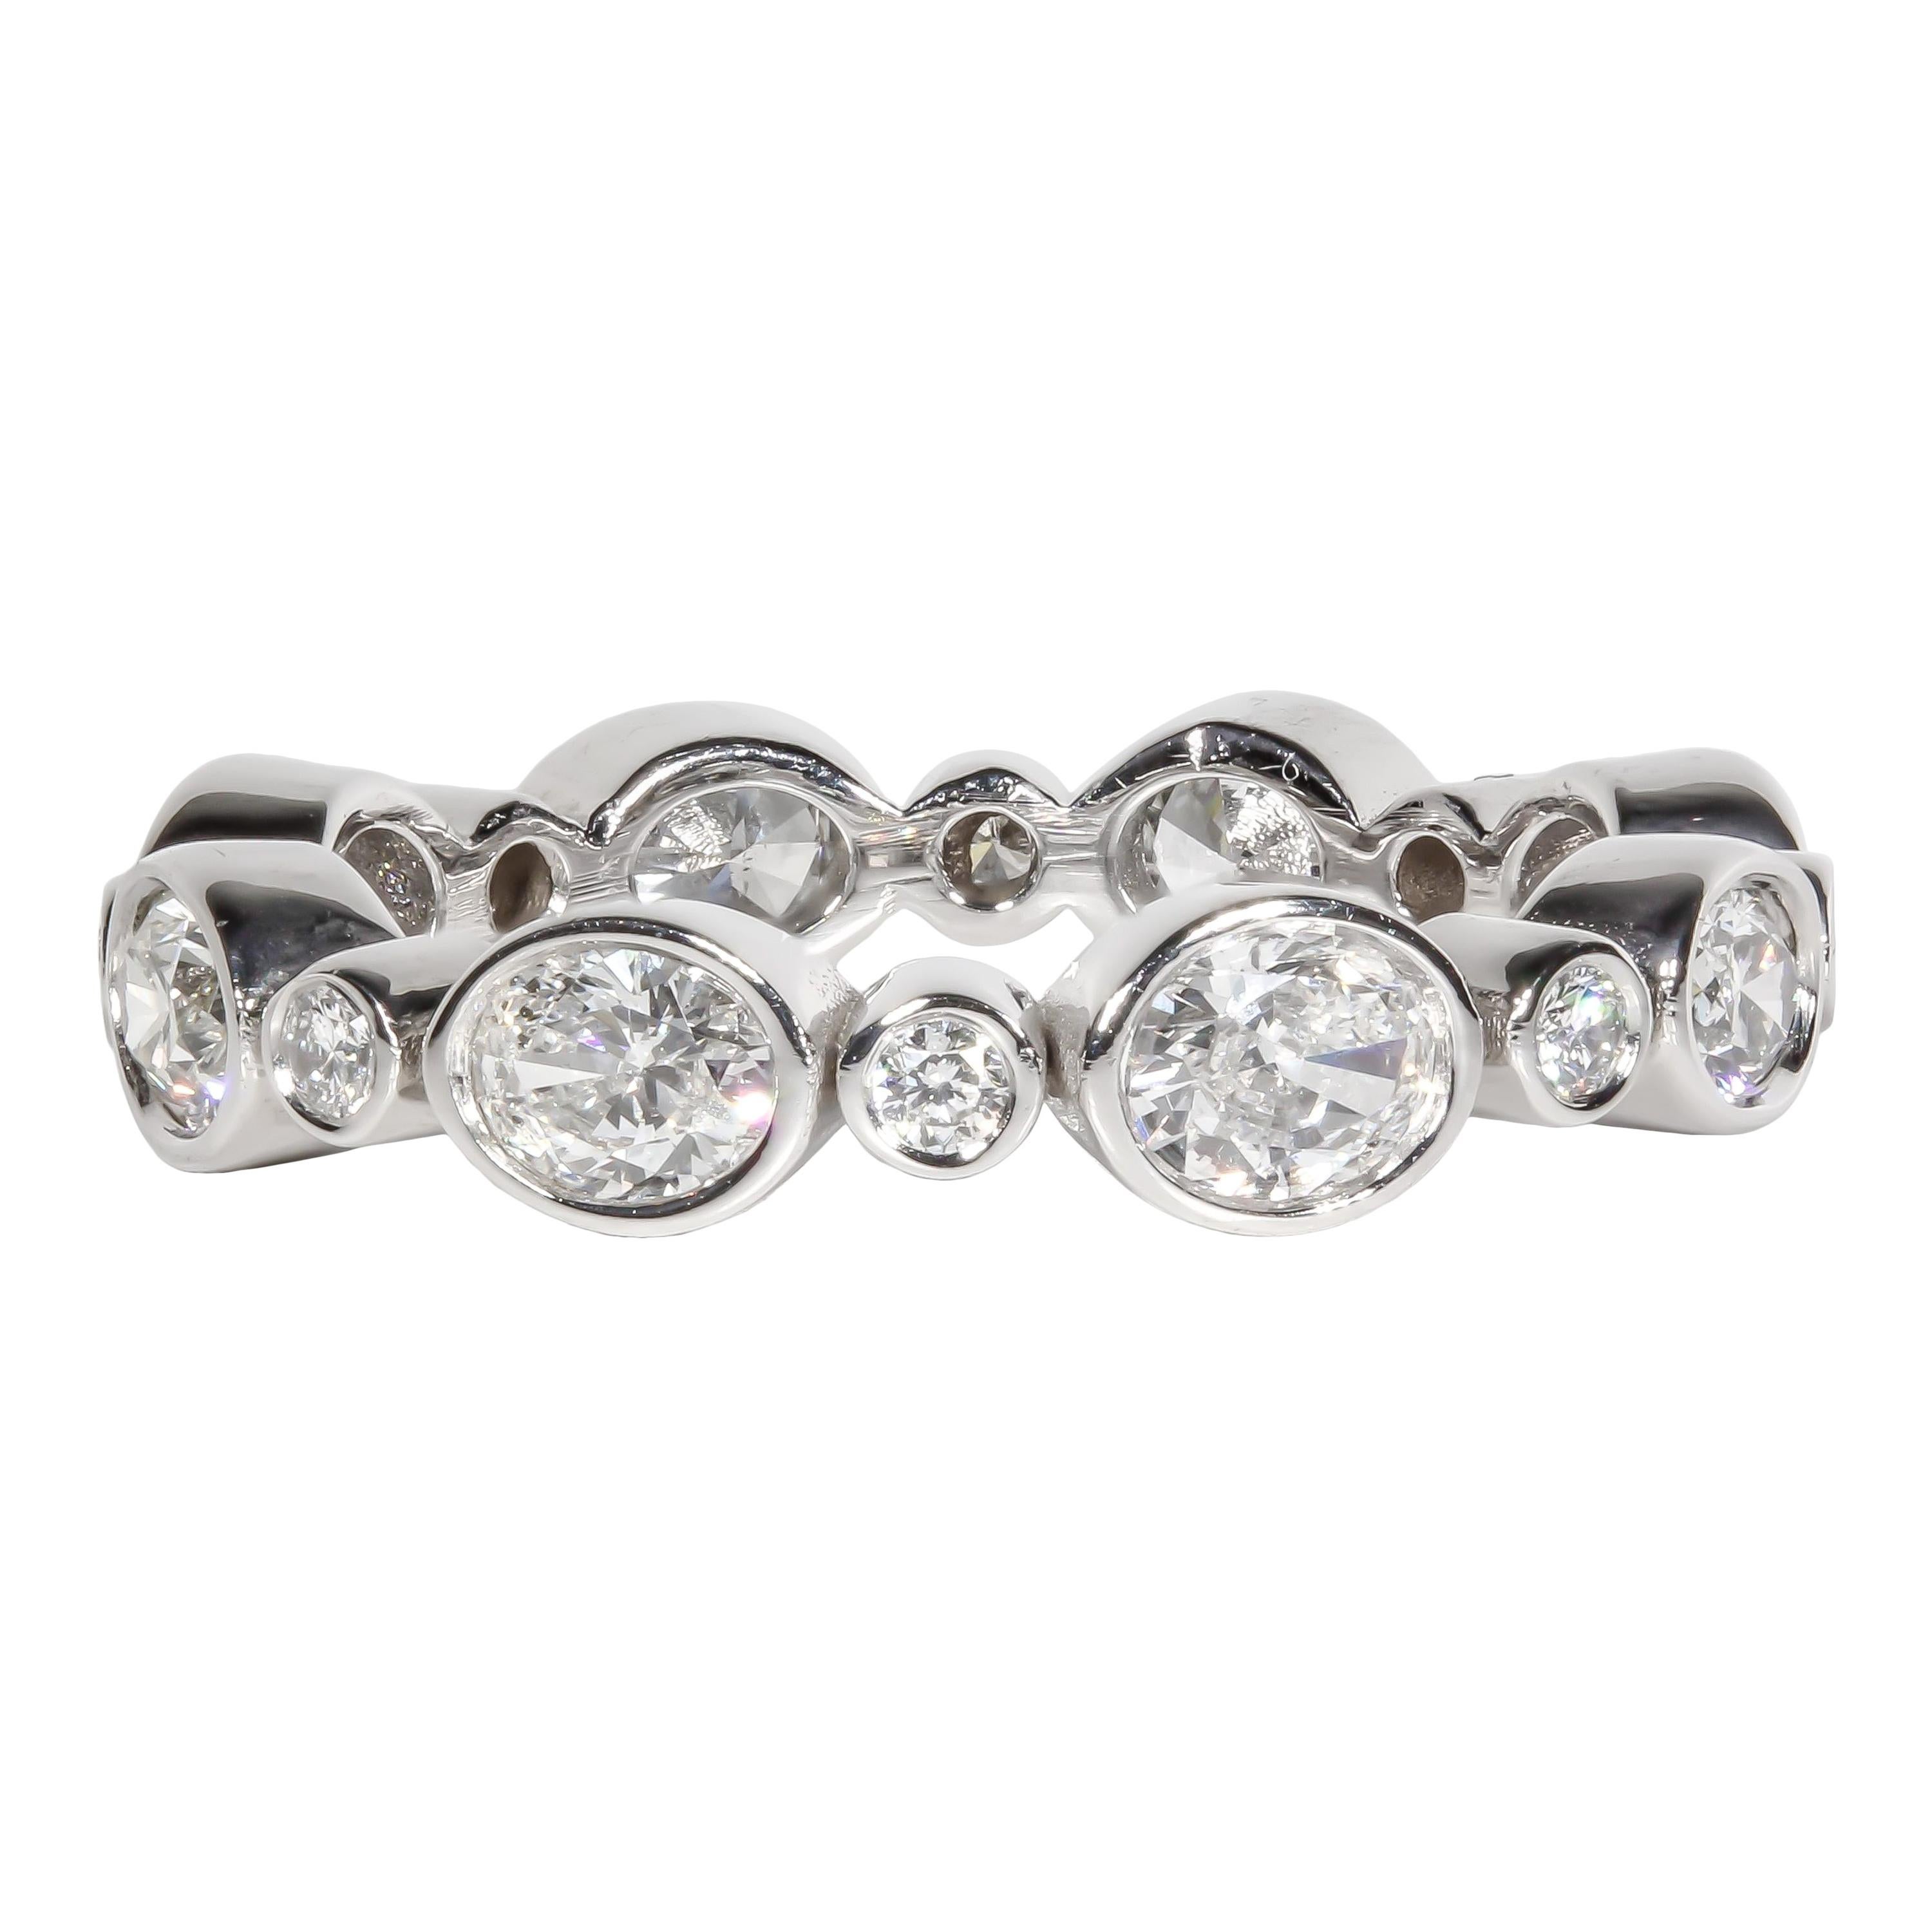 2.07 Carat Total Weight Diamond Eternity Band Ring